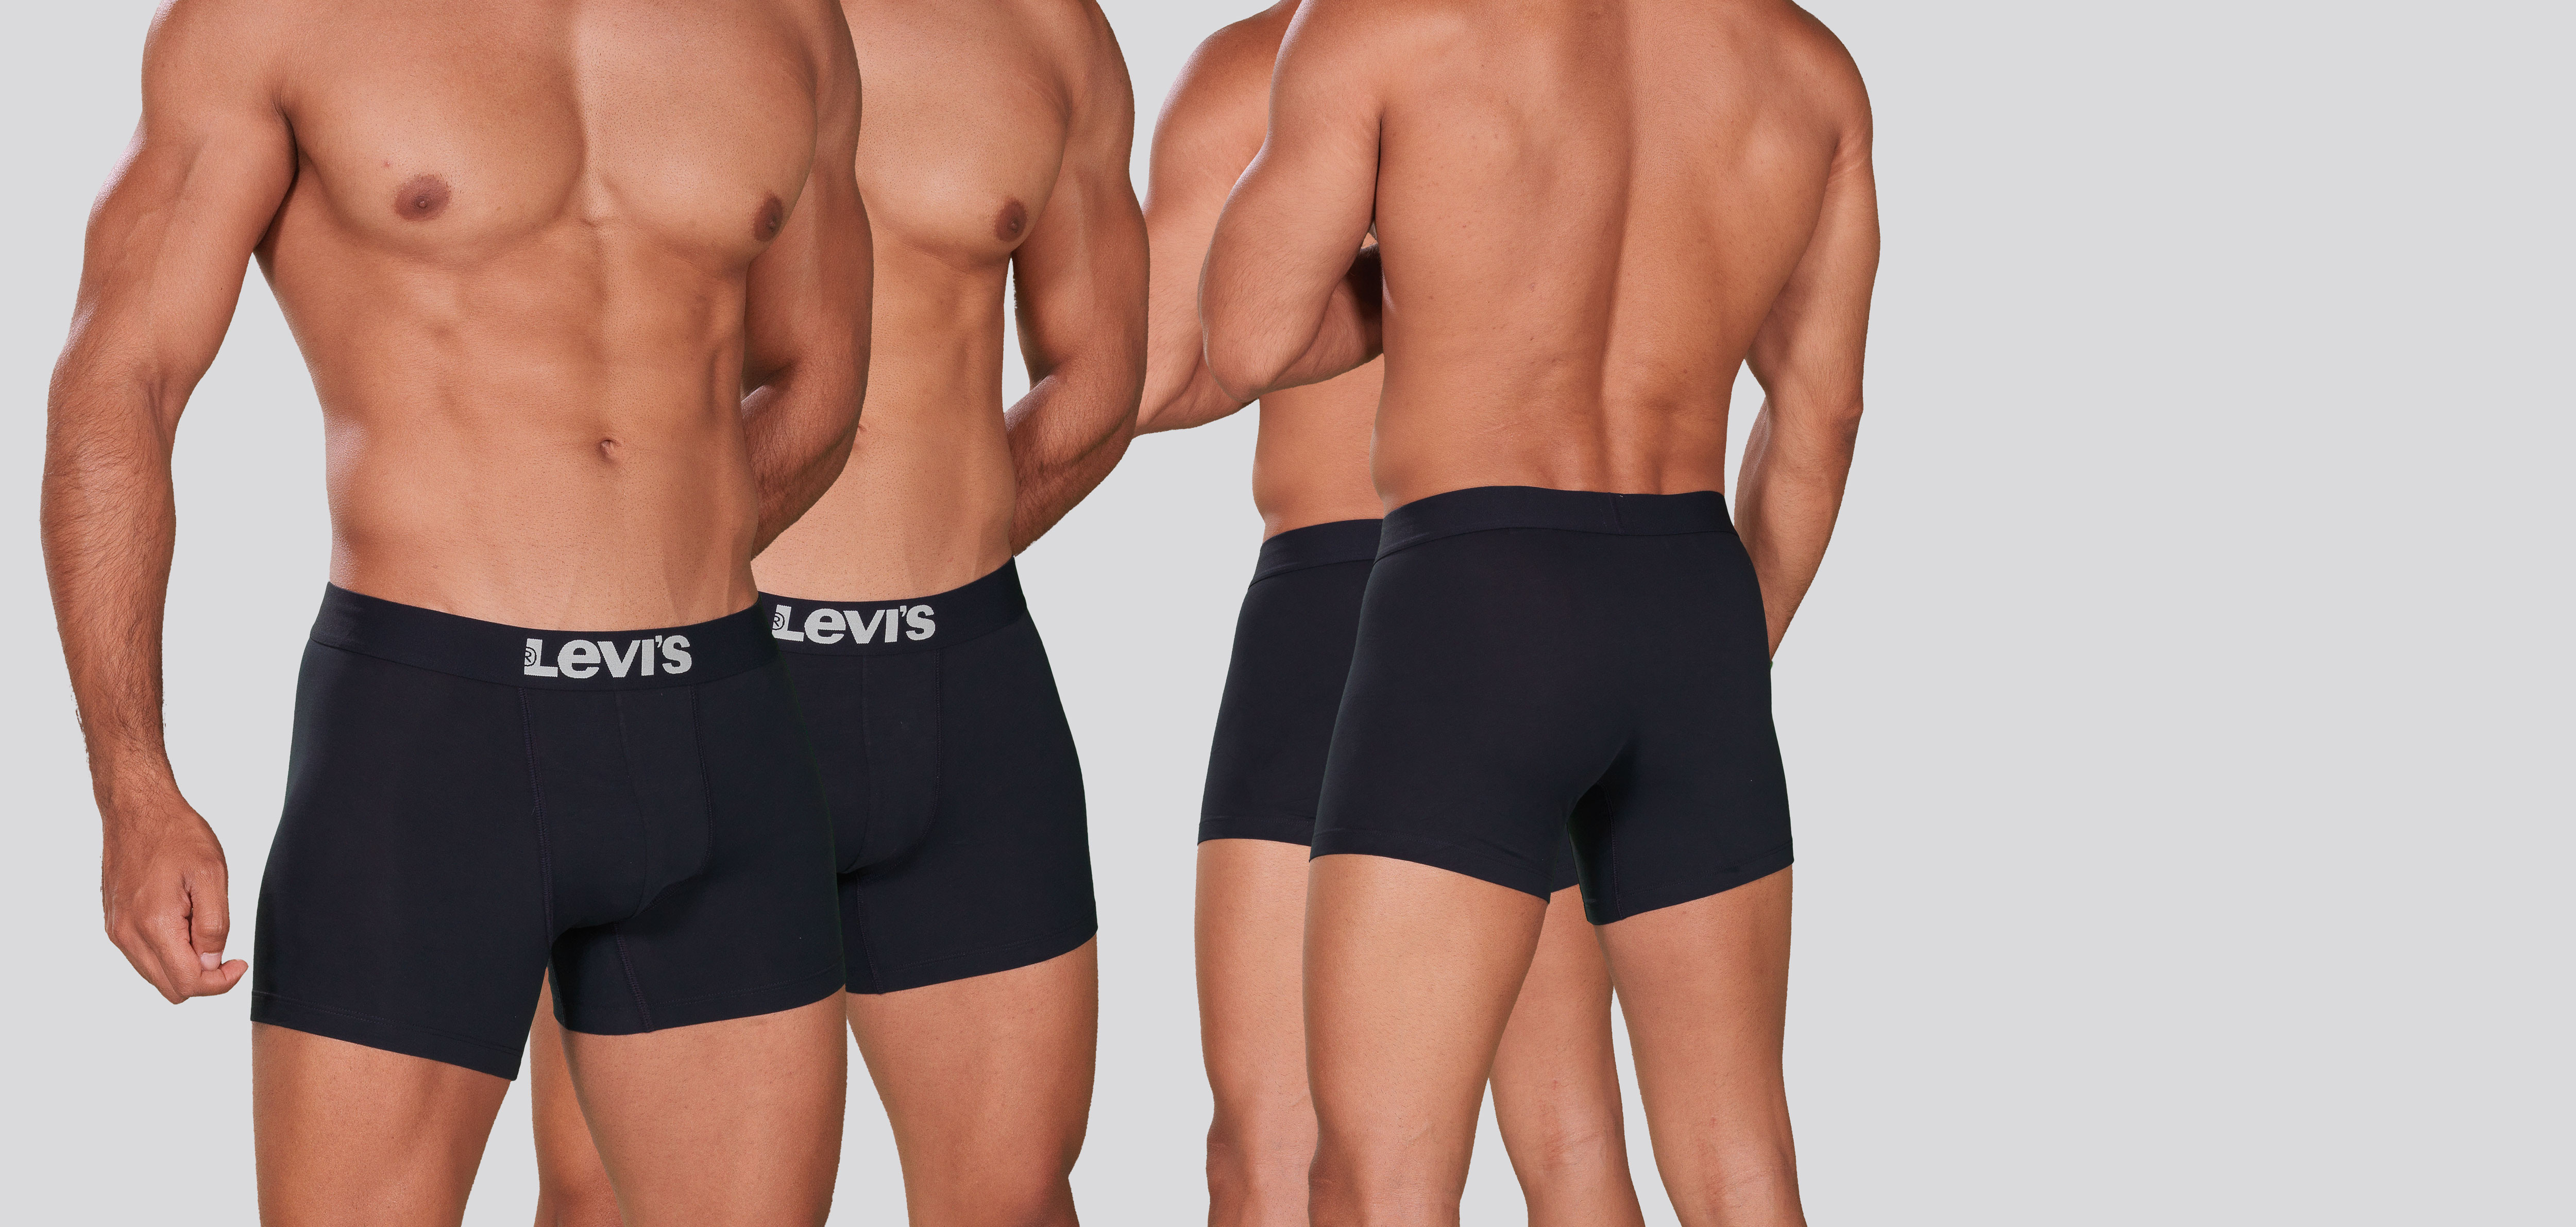 Levi_s Solid Basic Boxer Brief 2-Pack 1001,